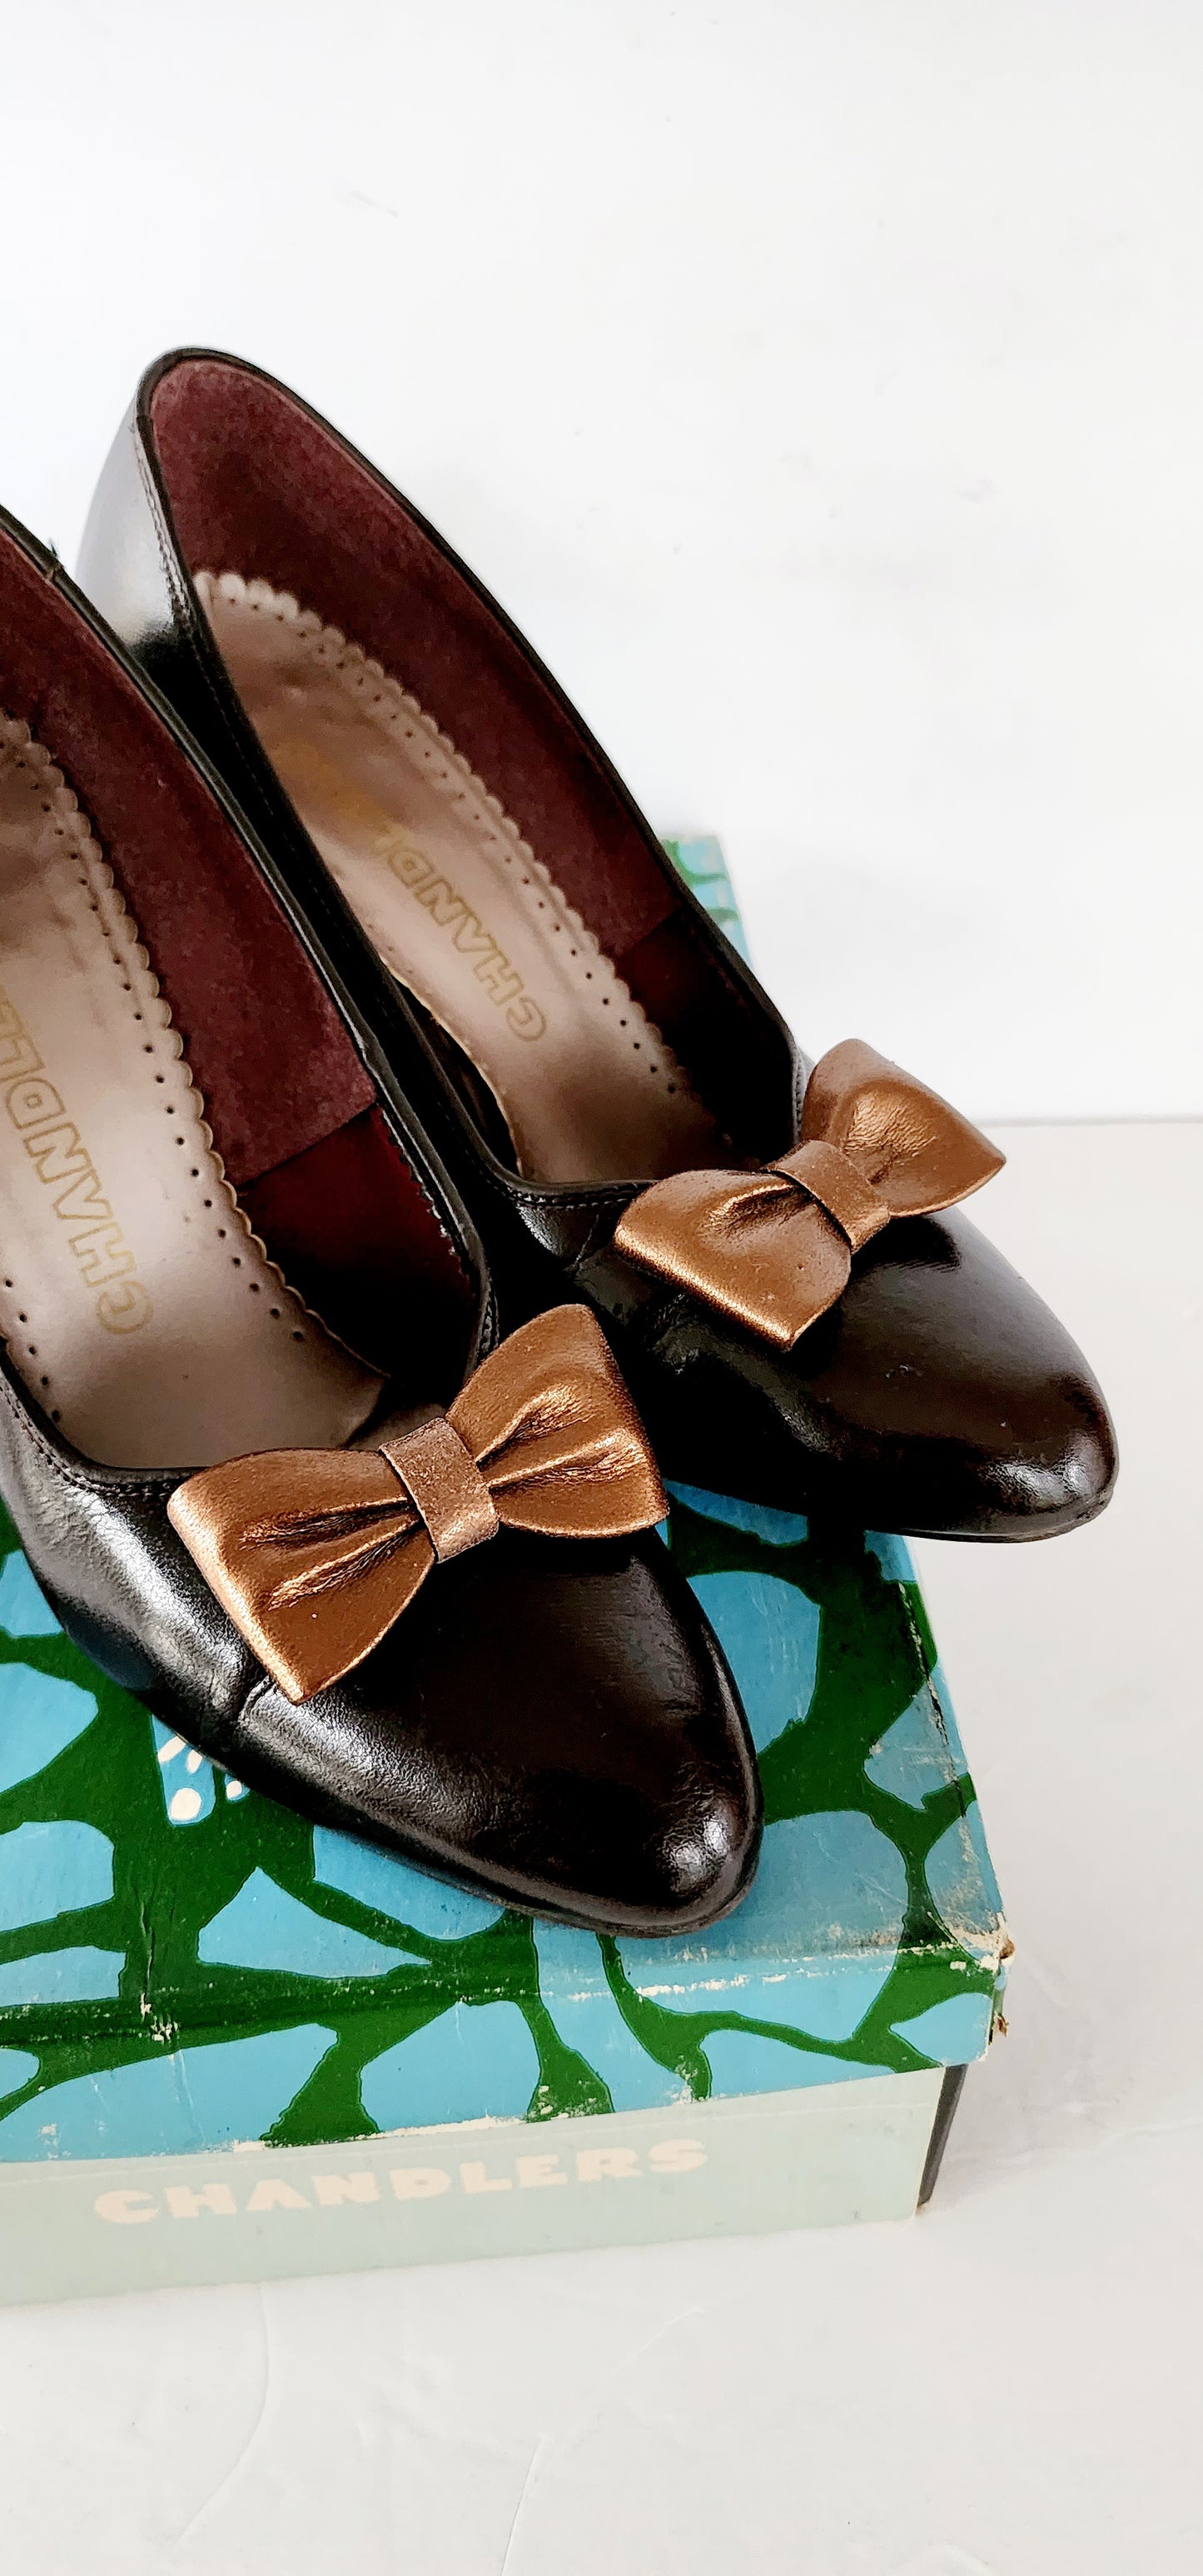 80s Brown Leather Pumps High Heels with Bow Clips by Chandlers Size 7 / Vegan / Original Box